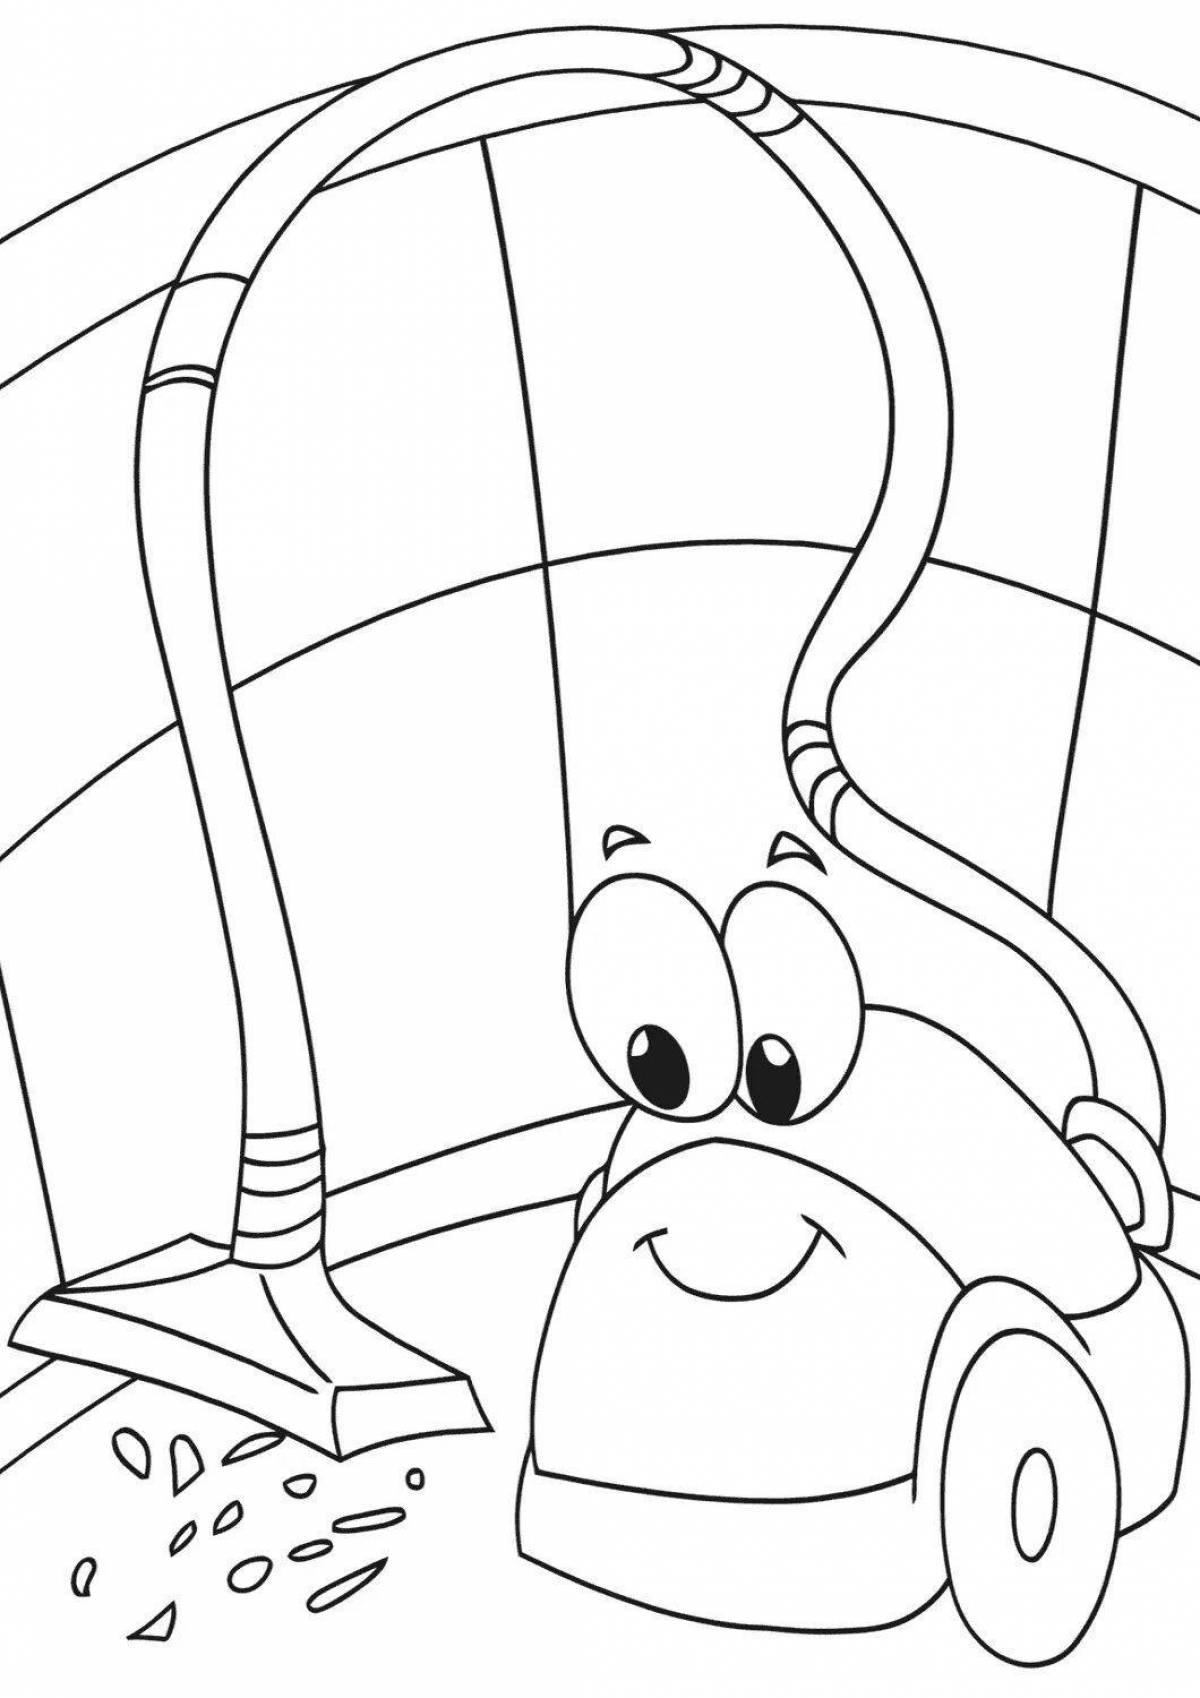 Adorable Baby Vacuum Cleaner Coloring Page